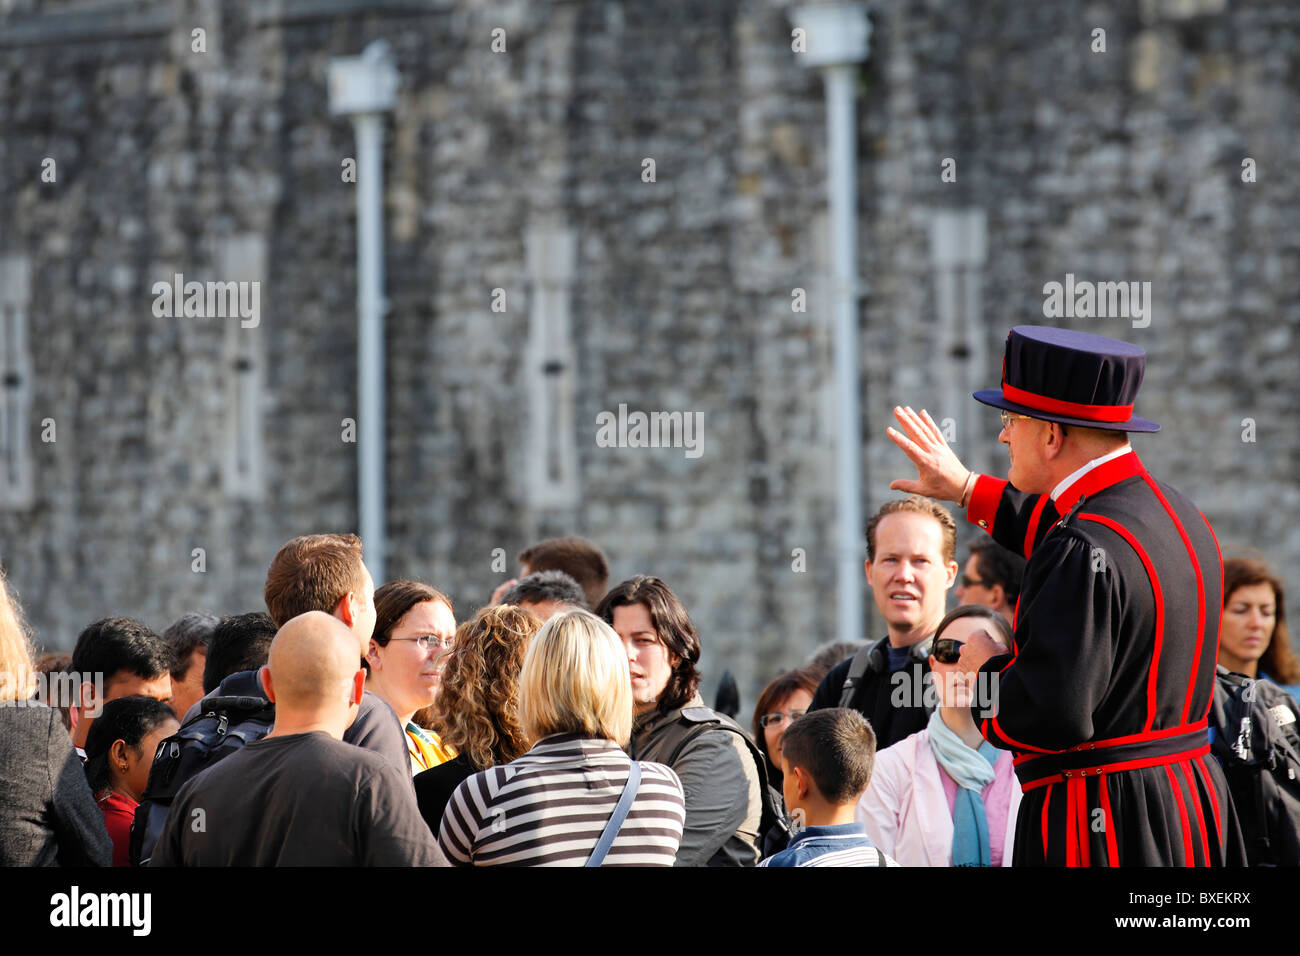 Beefeater with a tour group at the Tower of London, UK Stock Photo